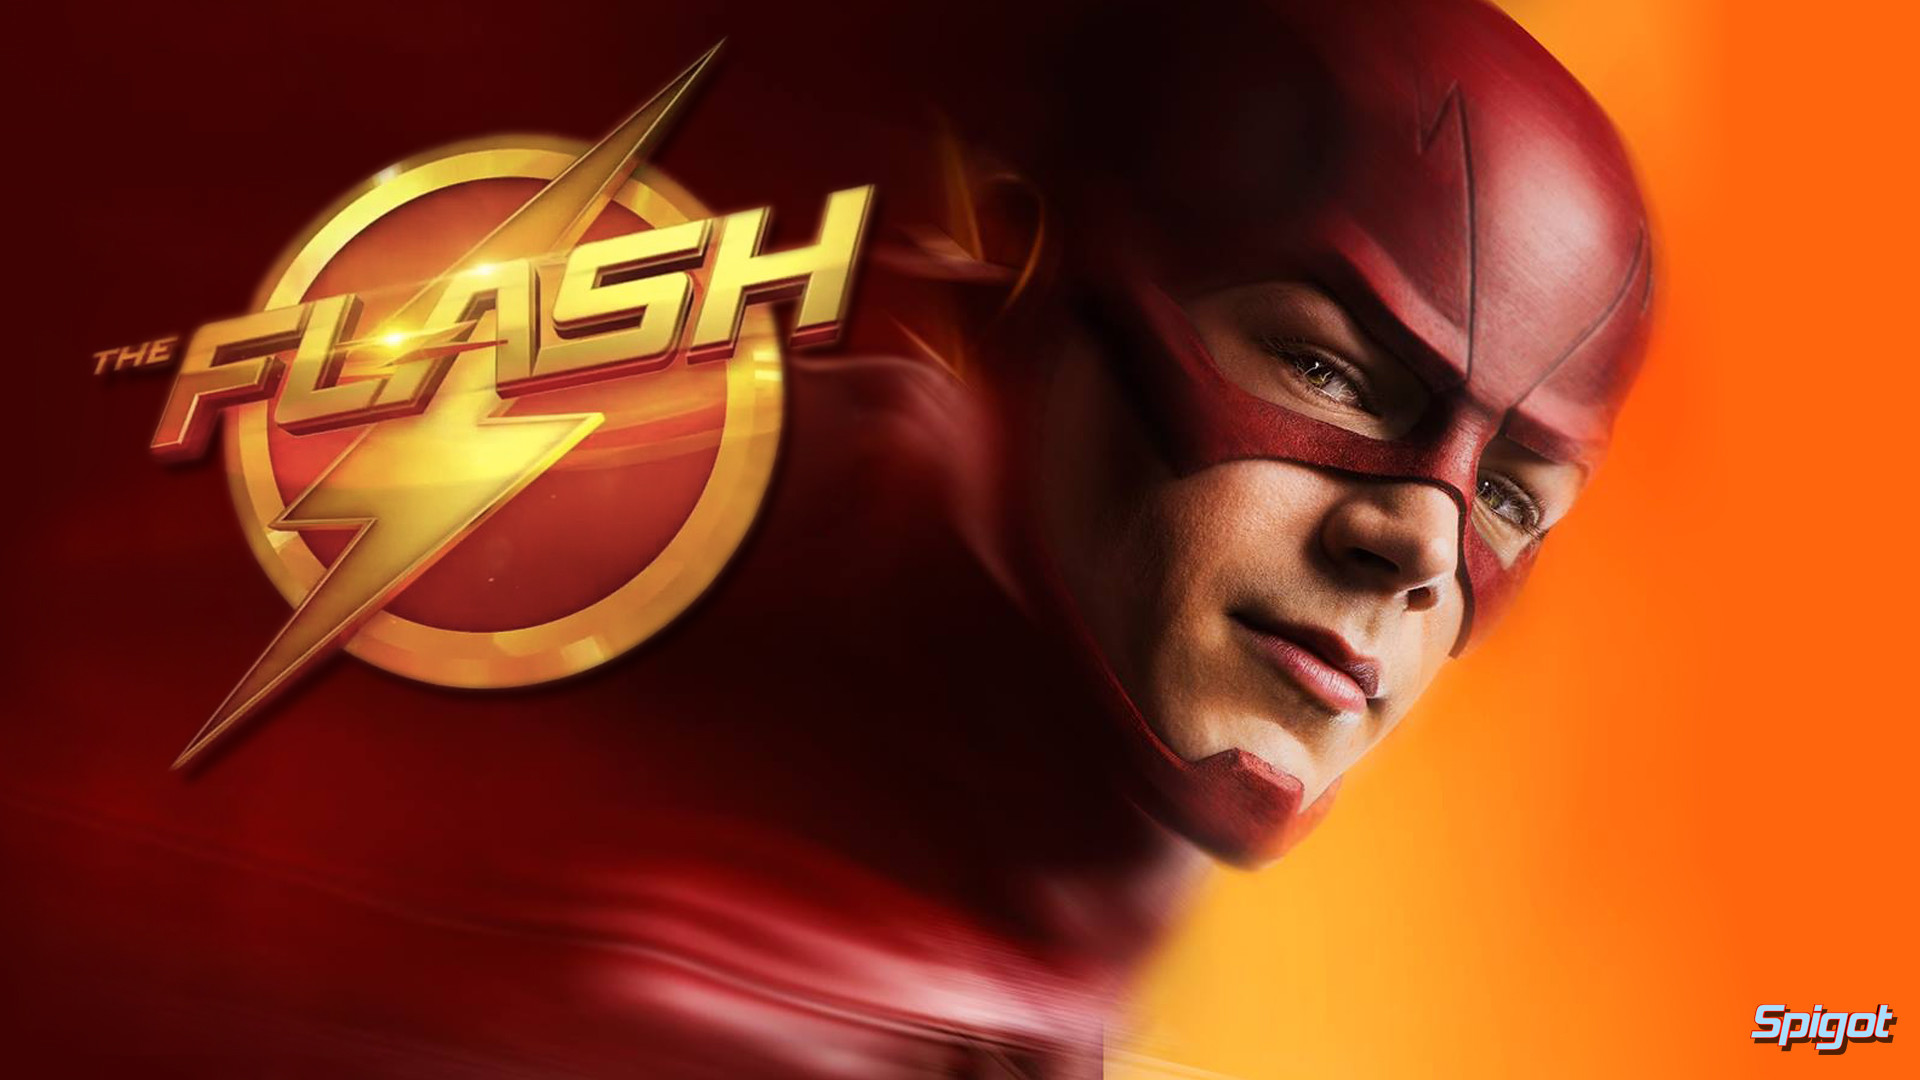 1920x1080 The Flash HD Wallpapers